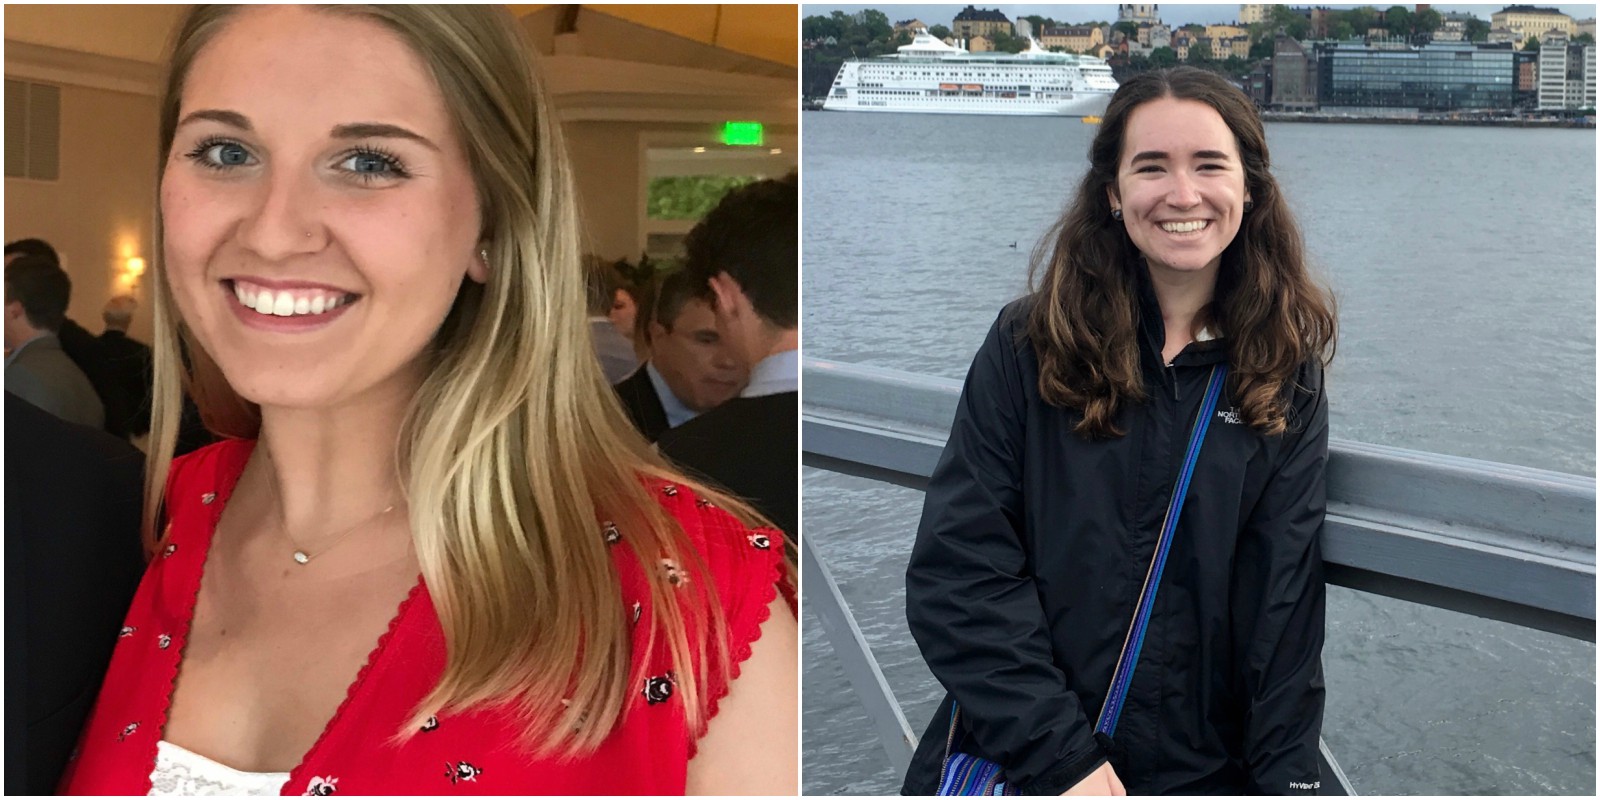 Left: Close-up of intern smiling. Right: Intern smiling in harbor.